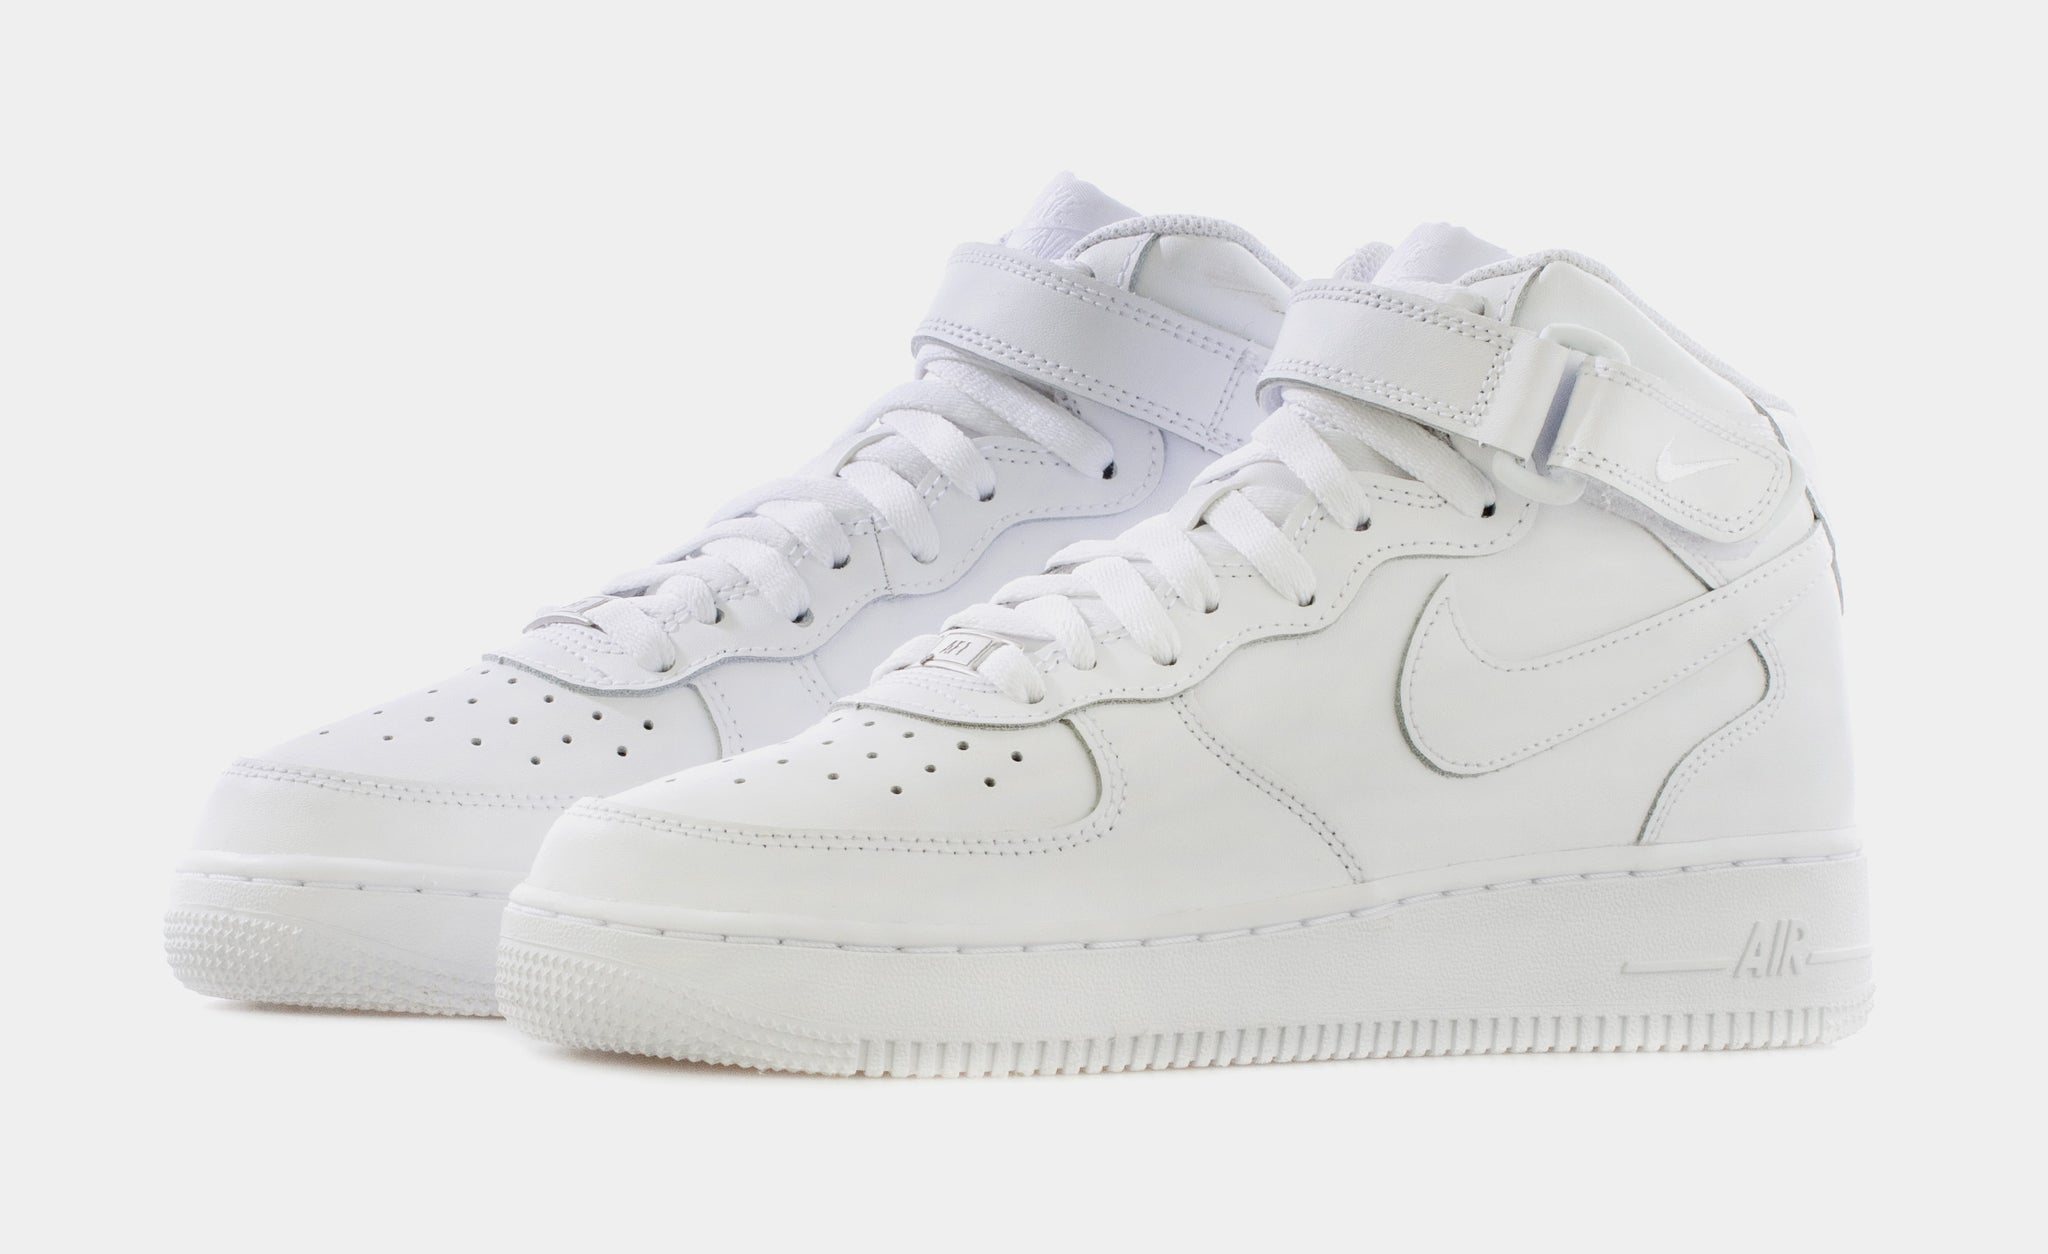 Nike Air Force 1 Mid 07 LE Grade School Lifestyle Shoes White